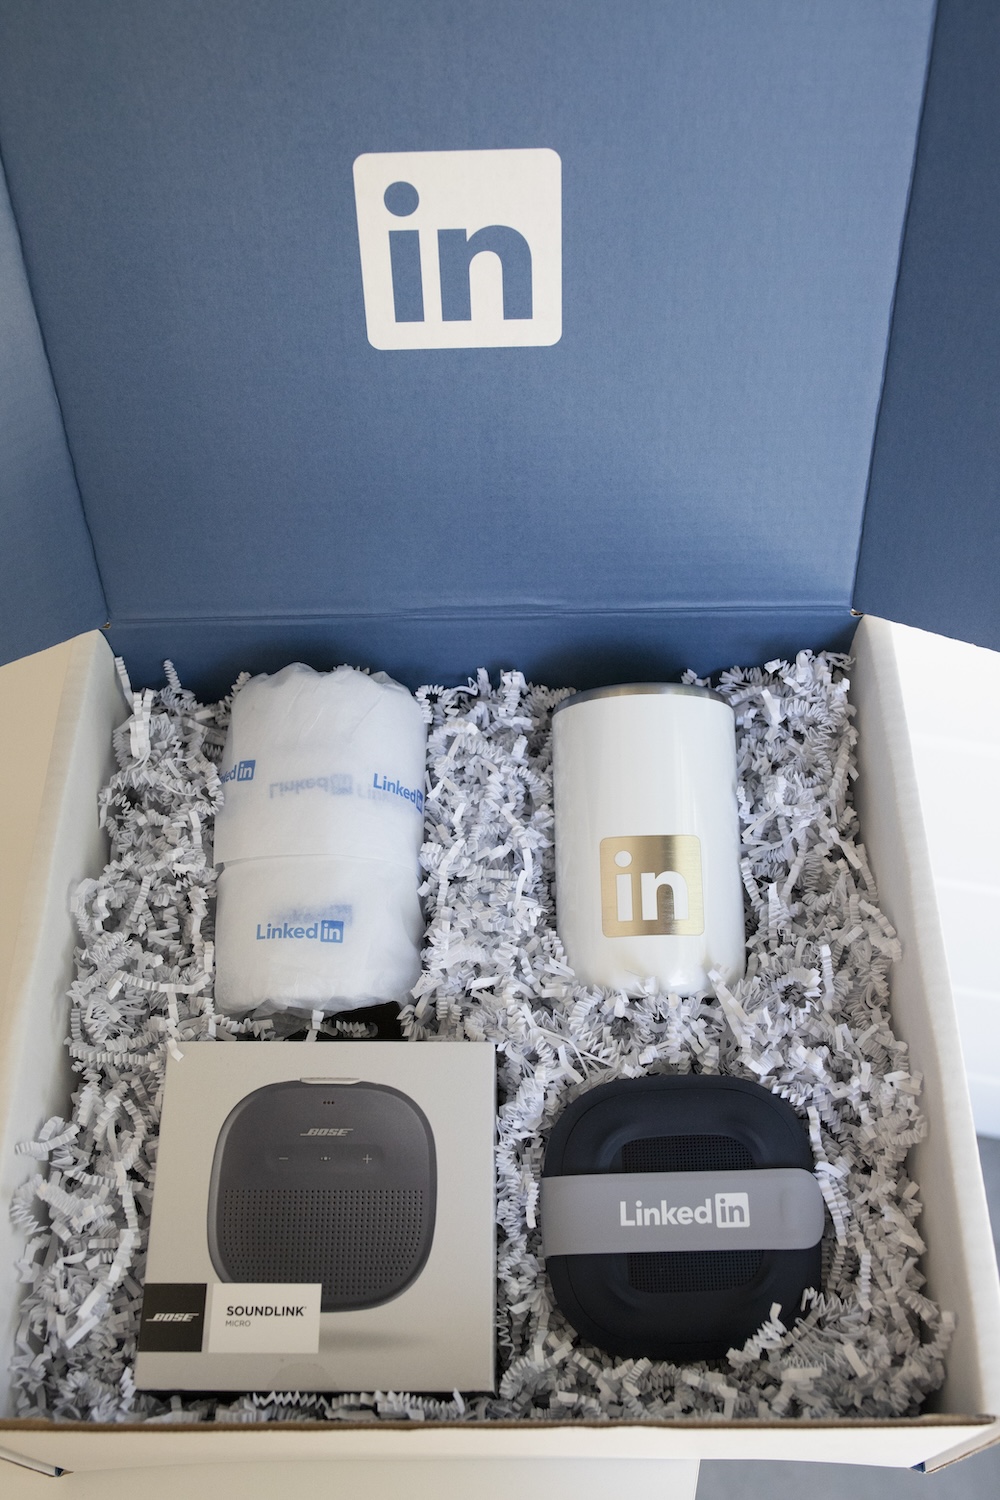 New hire kit for LinkedIn curated, kitted, and shipped by Swagger